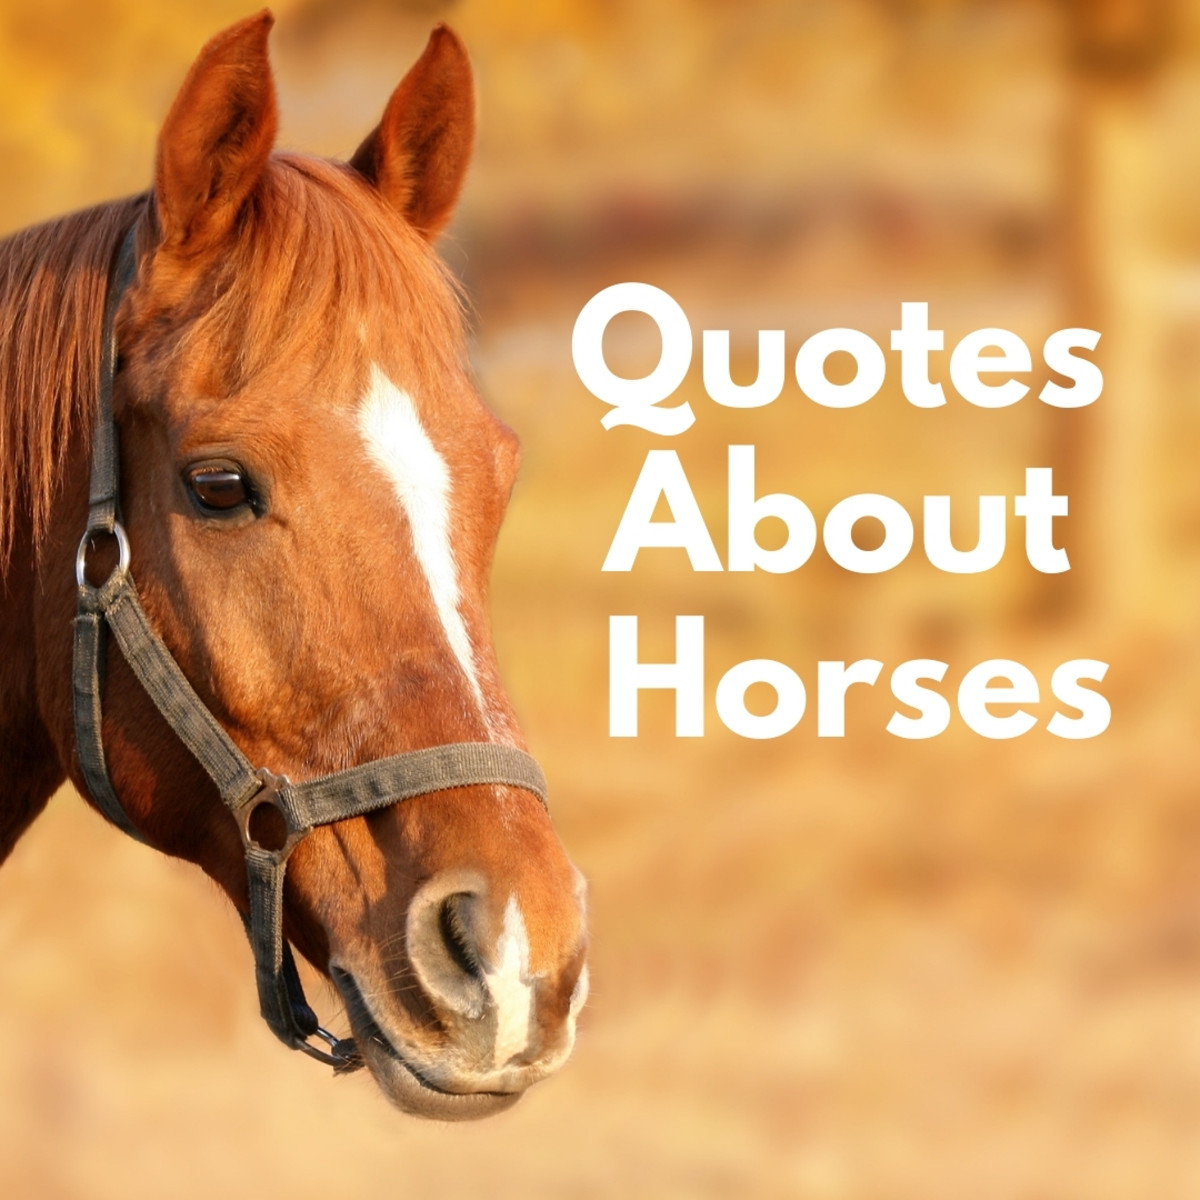 50+ Famous Quotes About Horses